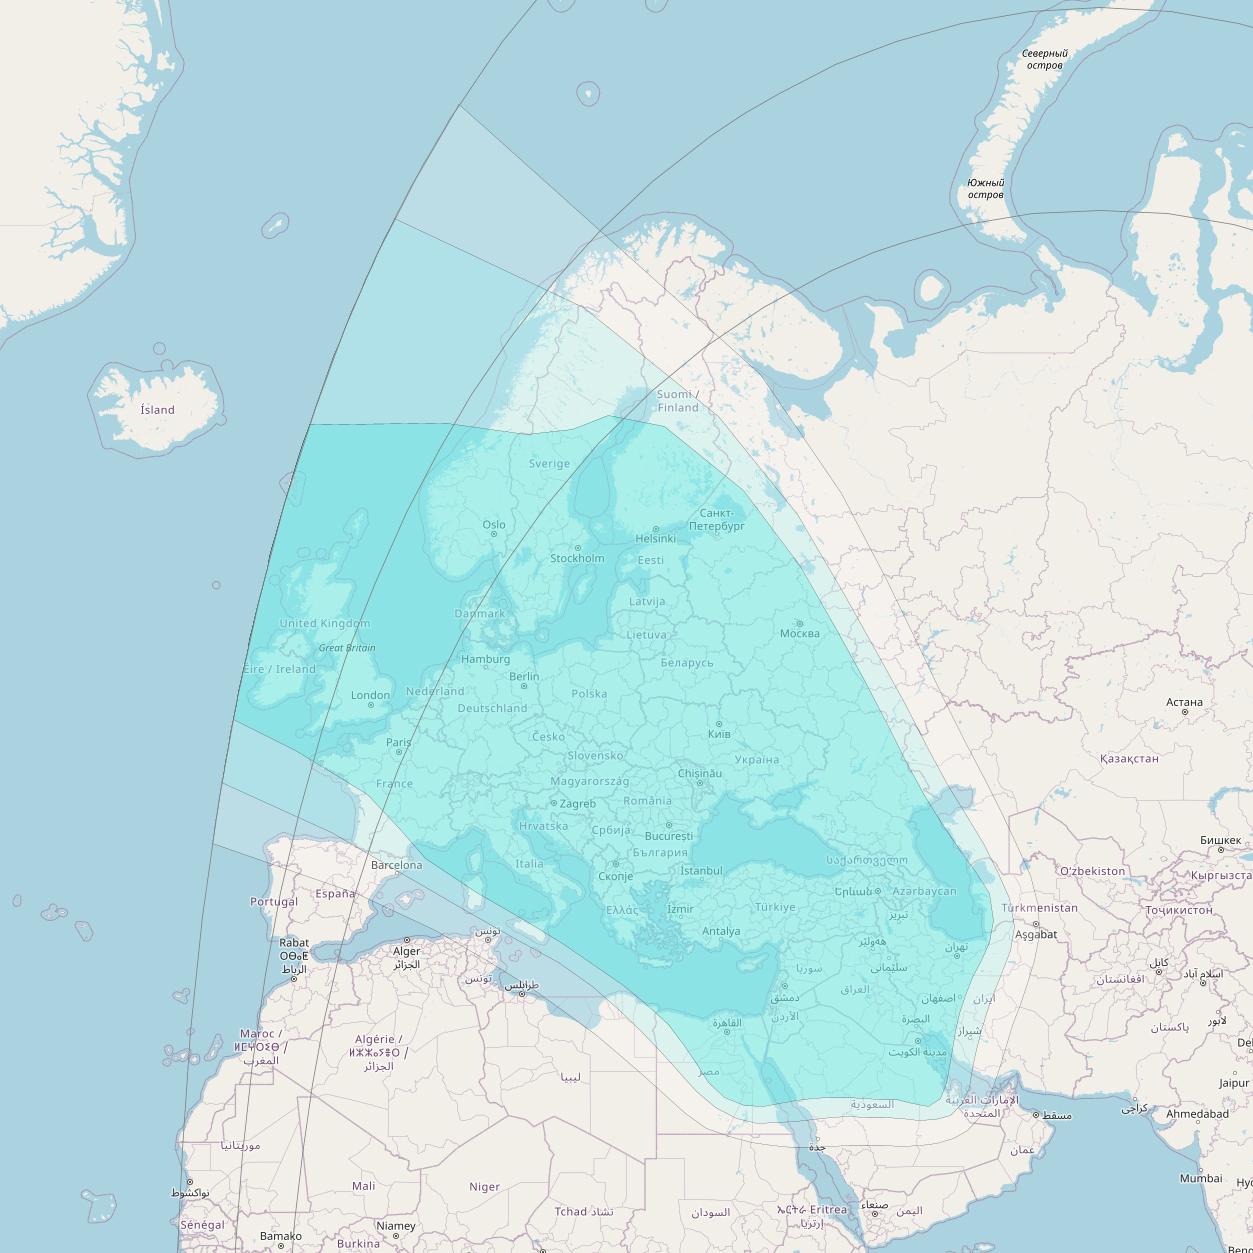 Inmarsat-4F2 at 64° E downlink L-band R016 Regional Spot beam coverage map